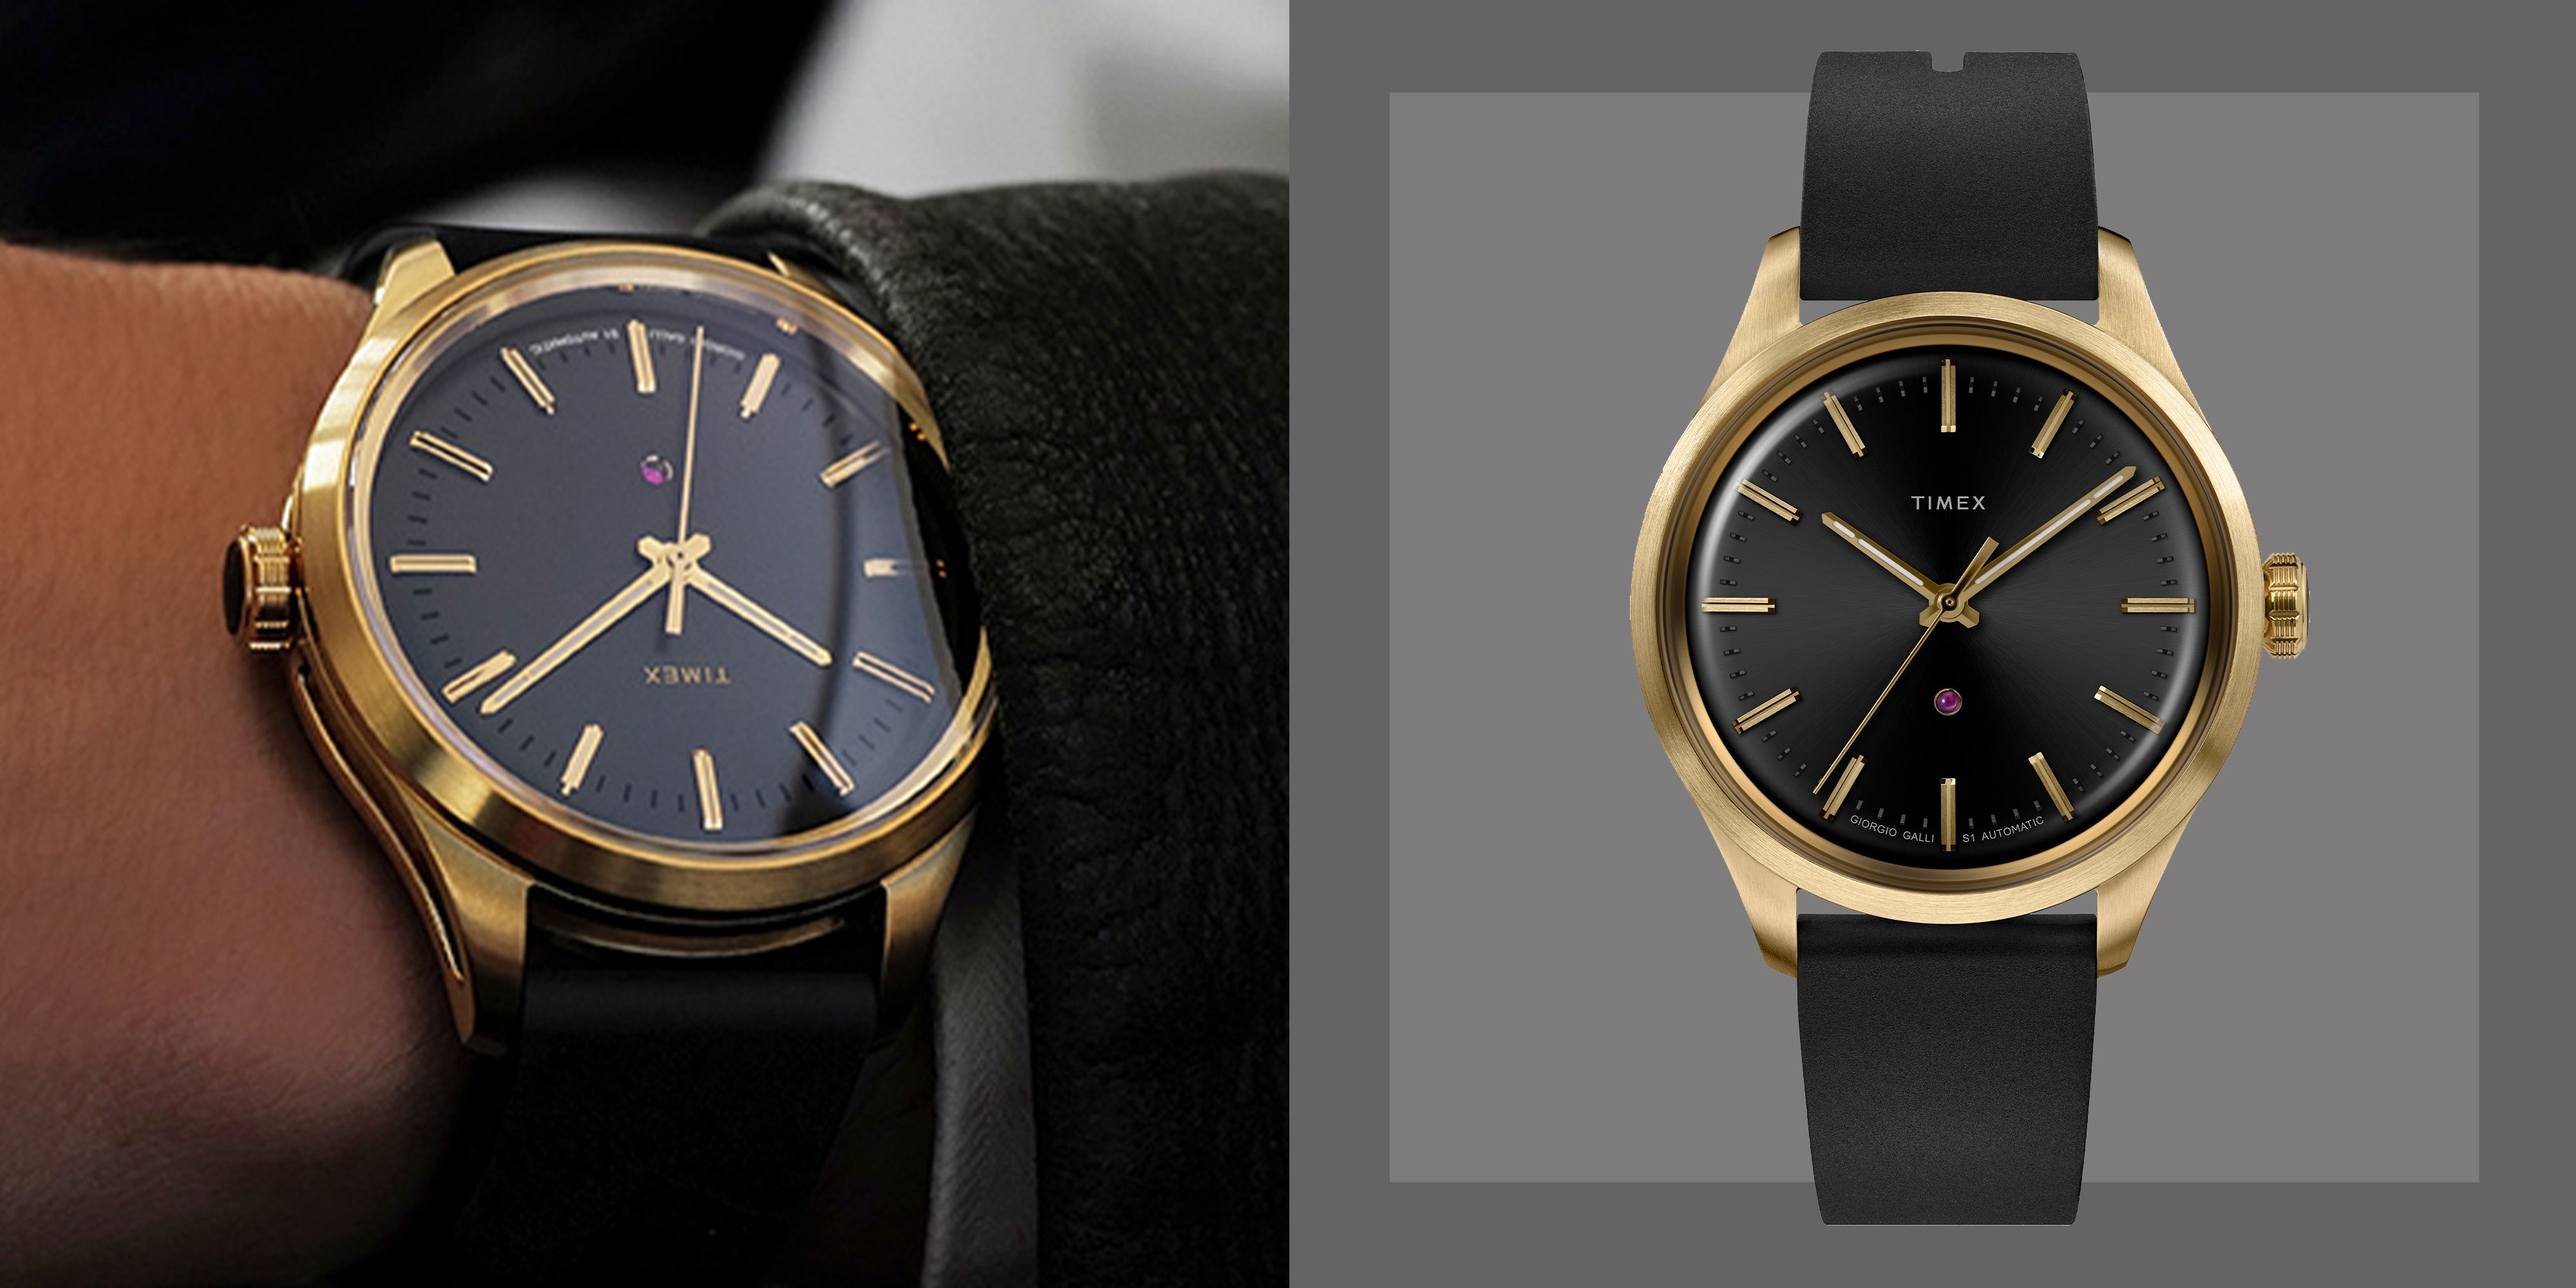 Timex Giorgio Galli S1 Automatic 38mm Black and Gold Watch